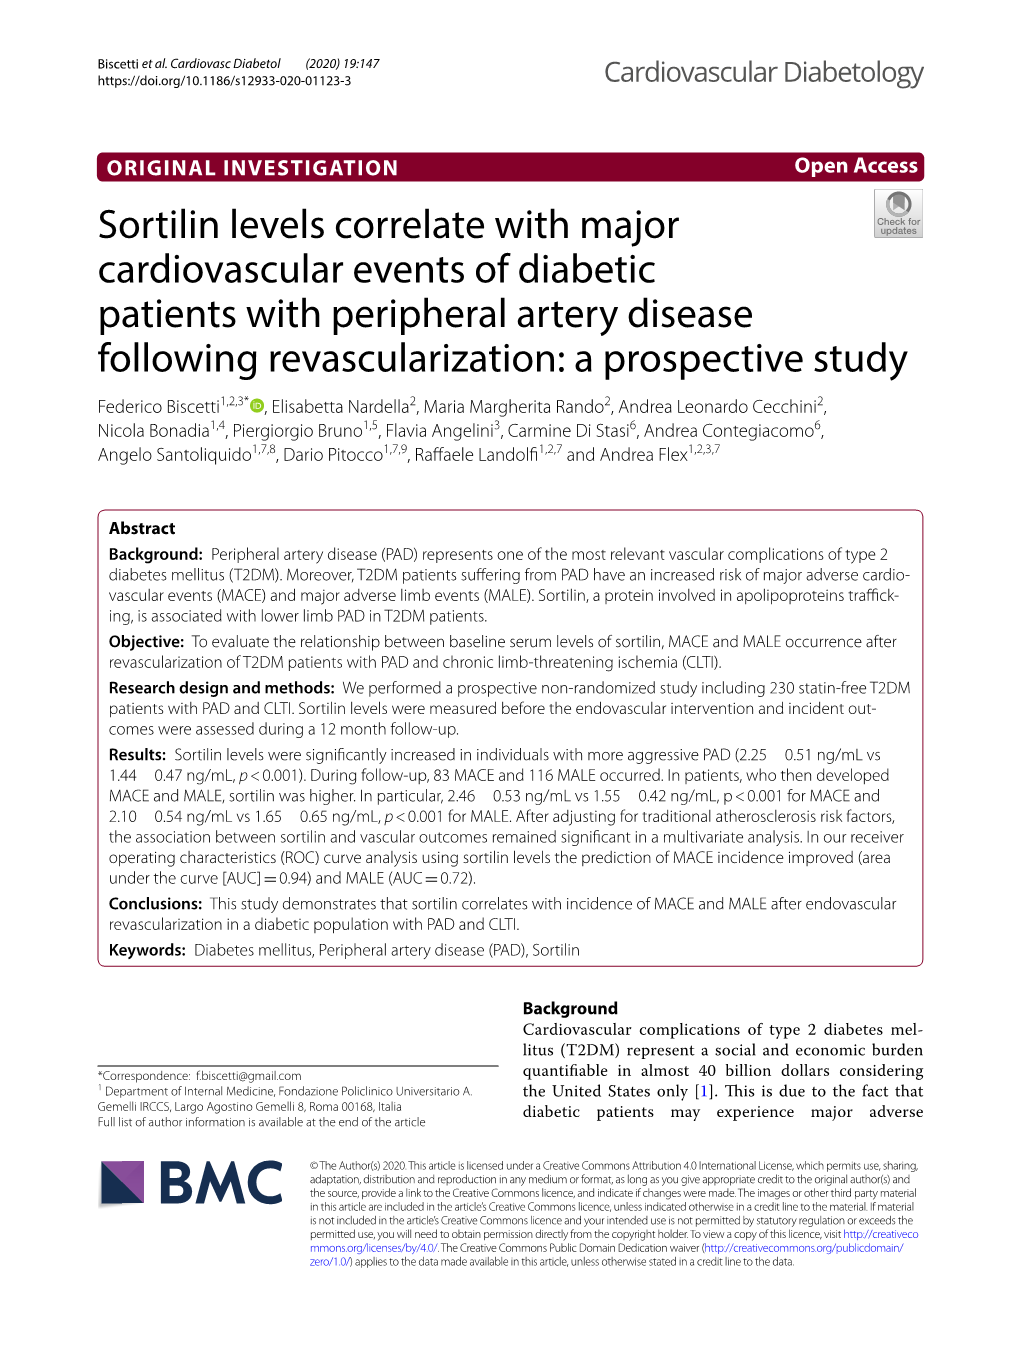 Sortilin Levels Correlate with Major Cardiovascular Events of Diabetic